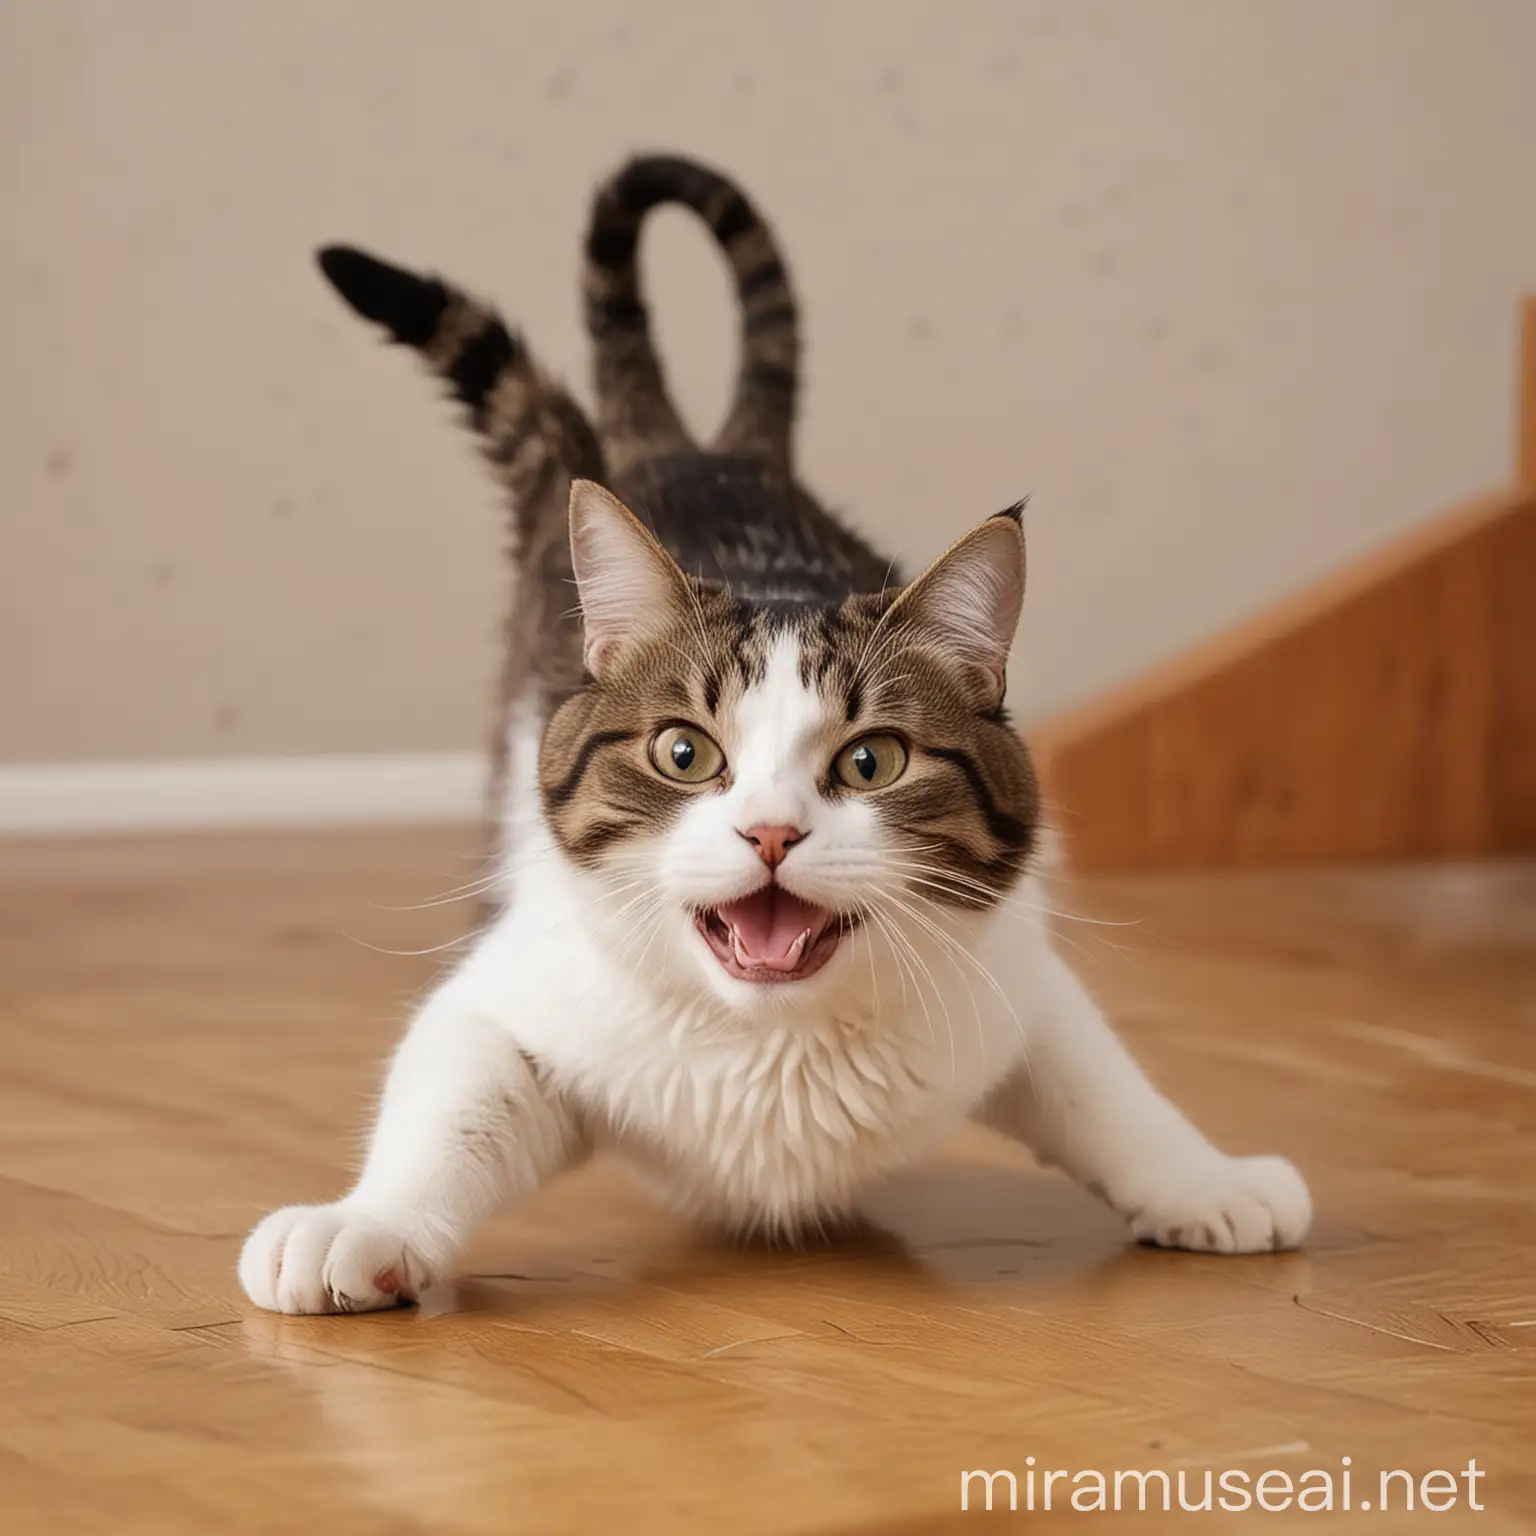 Playful Cats Making Silly Faces and Chasing Tails